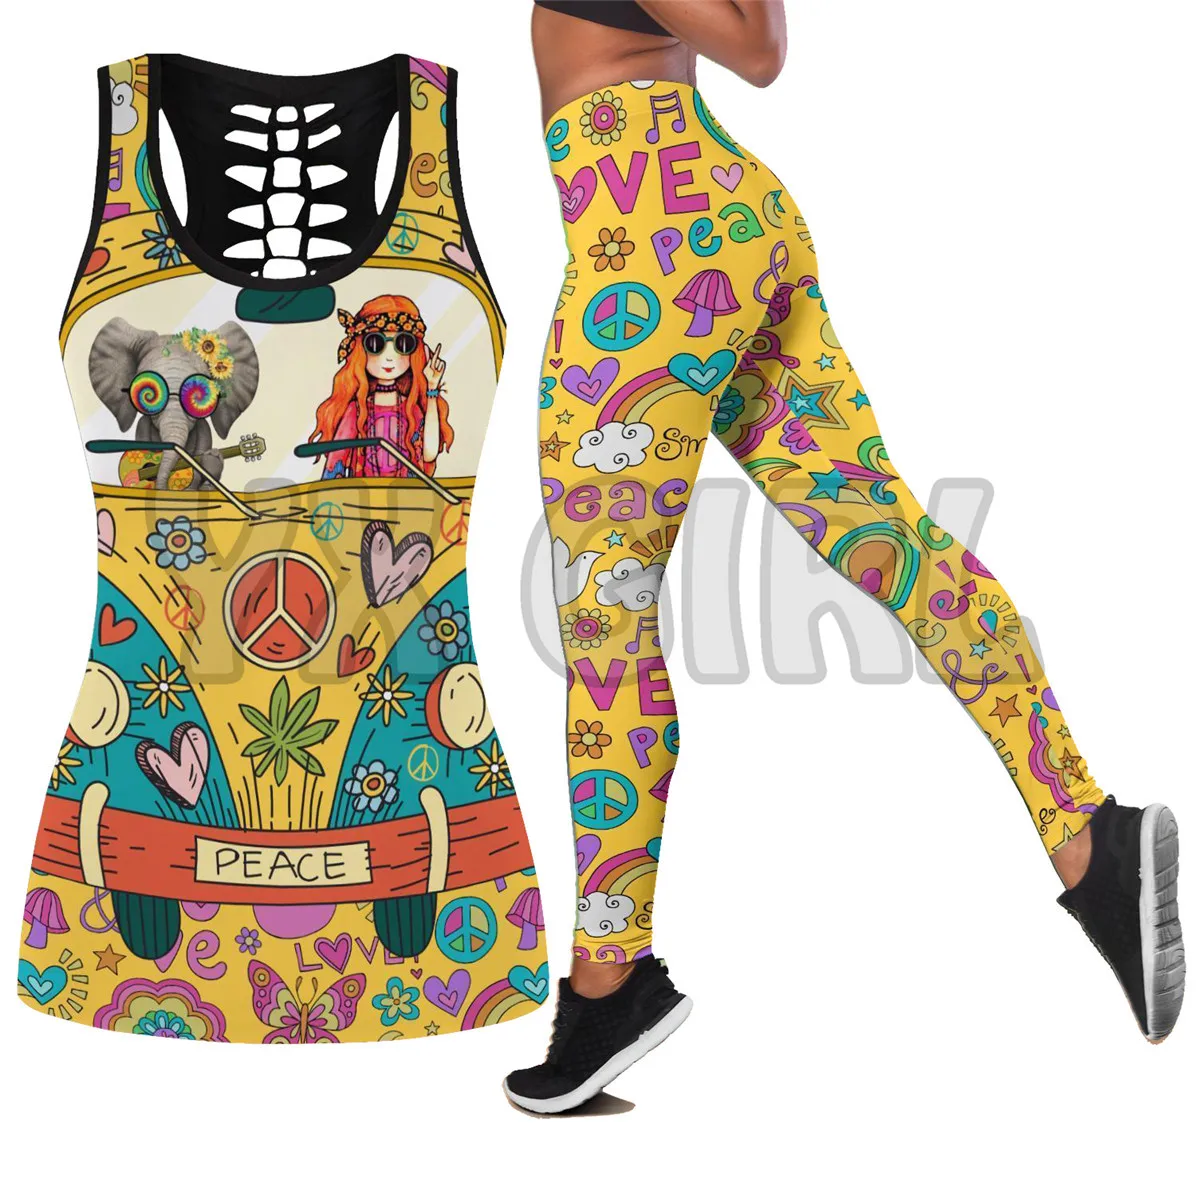 Hippie Girl With Elephant  3D Printed Tank Top+Legging Combo Outfit Yoga Fitness Legging Women